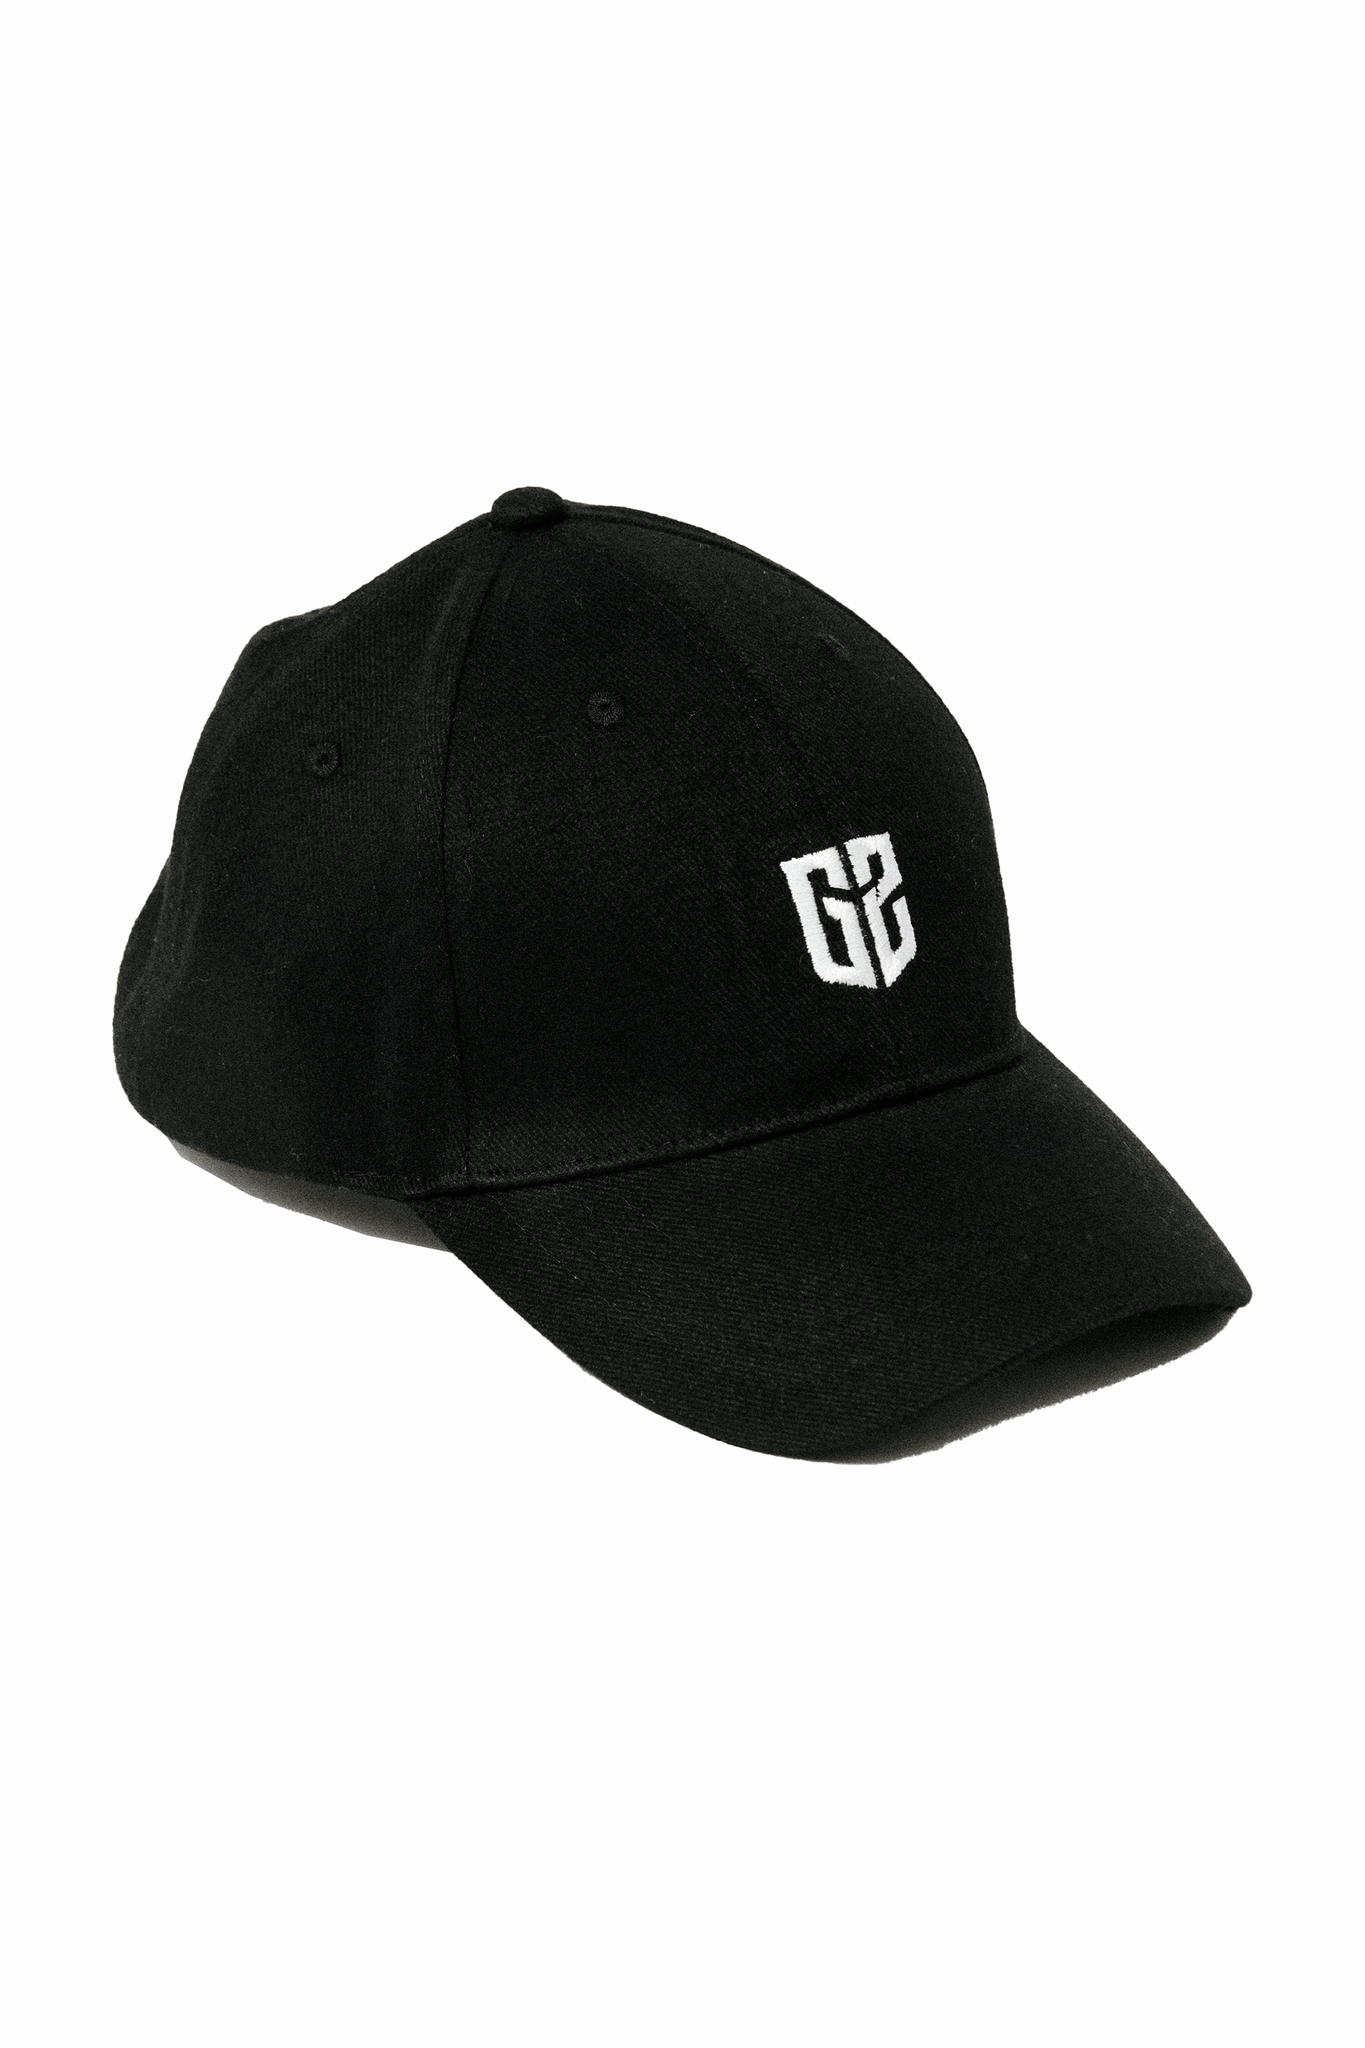 Black G2 Esports essentials snapback cap with curved brim. Elevate your look with this esports team cap, featuring the iconic G2 logo